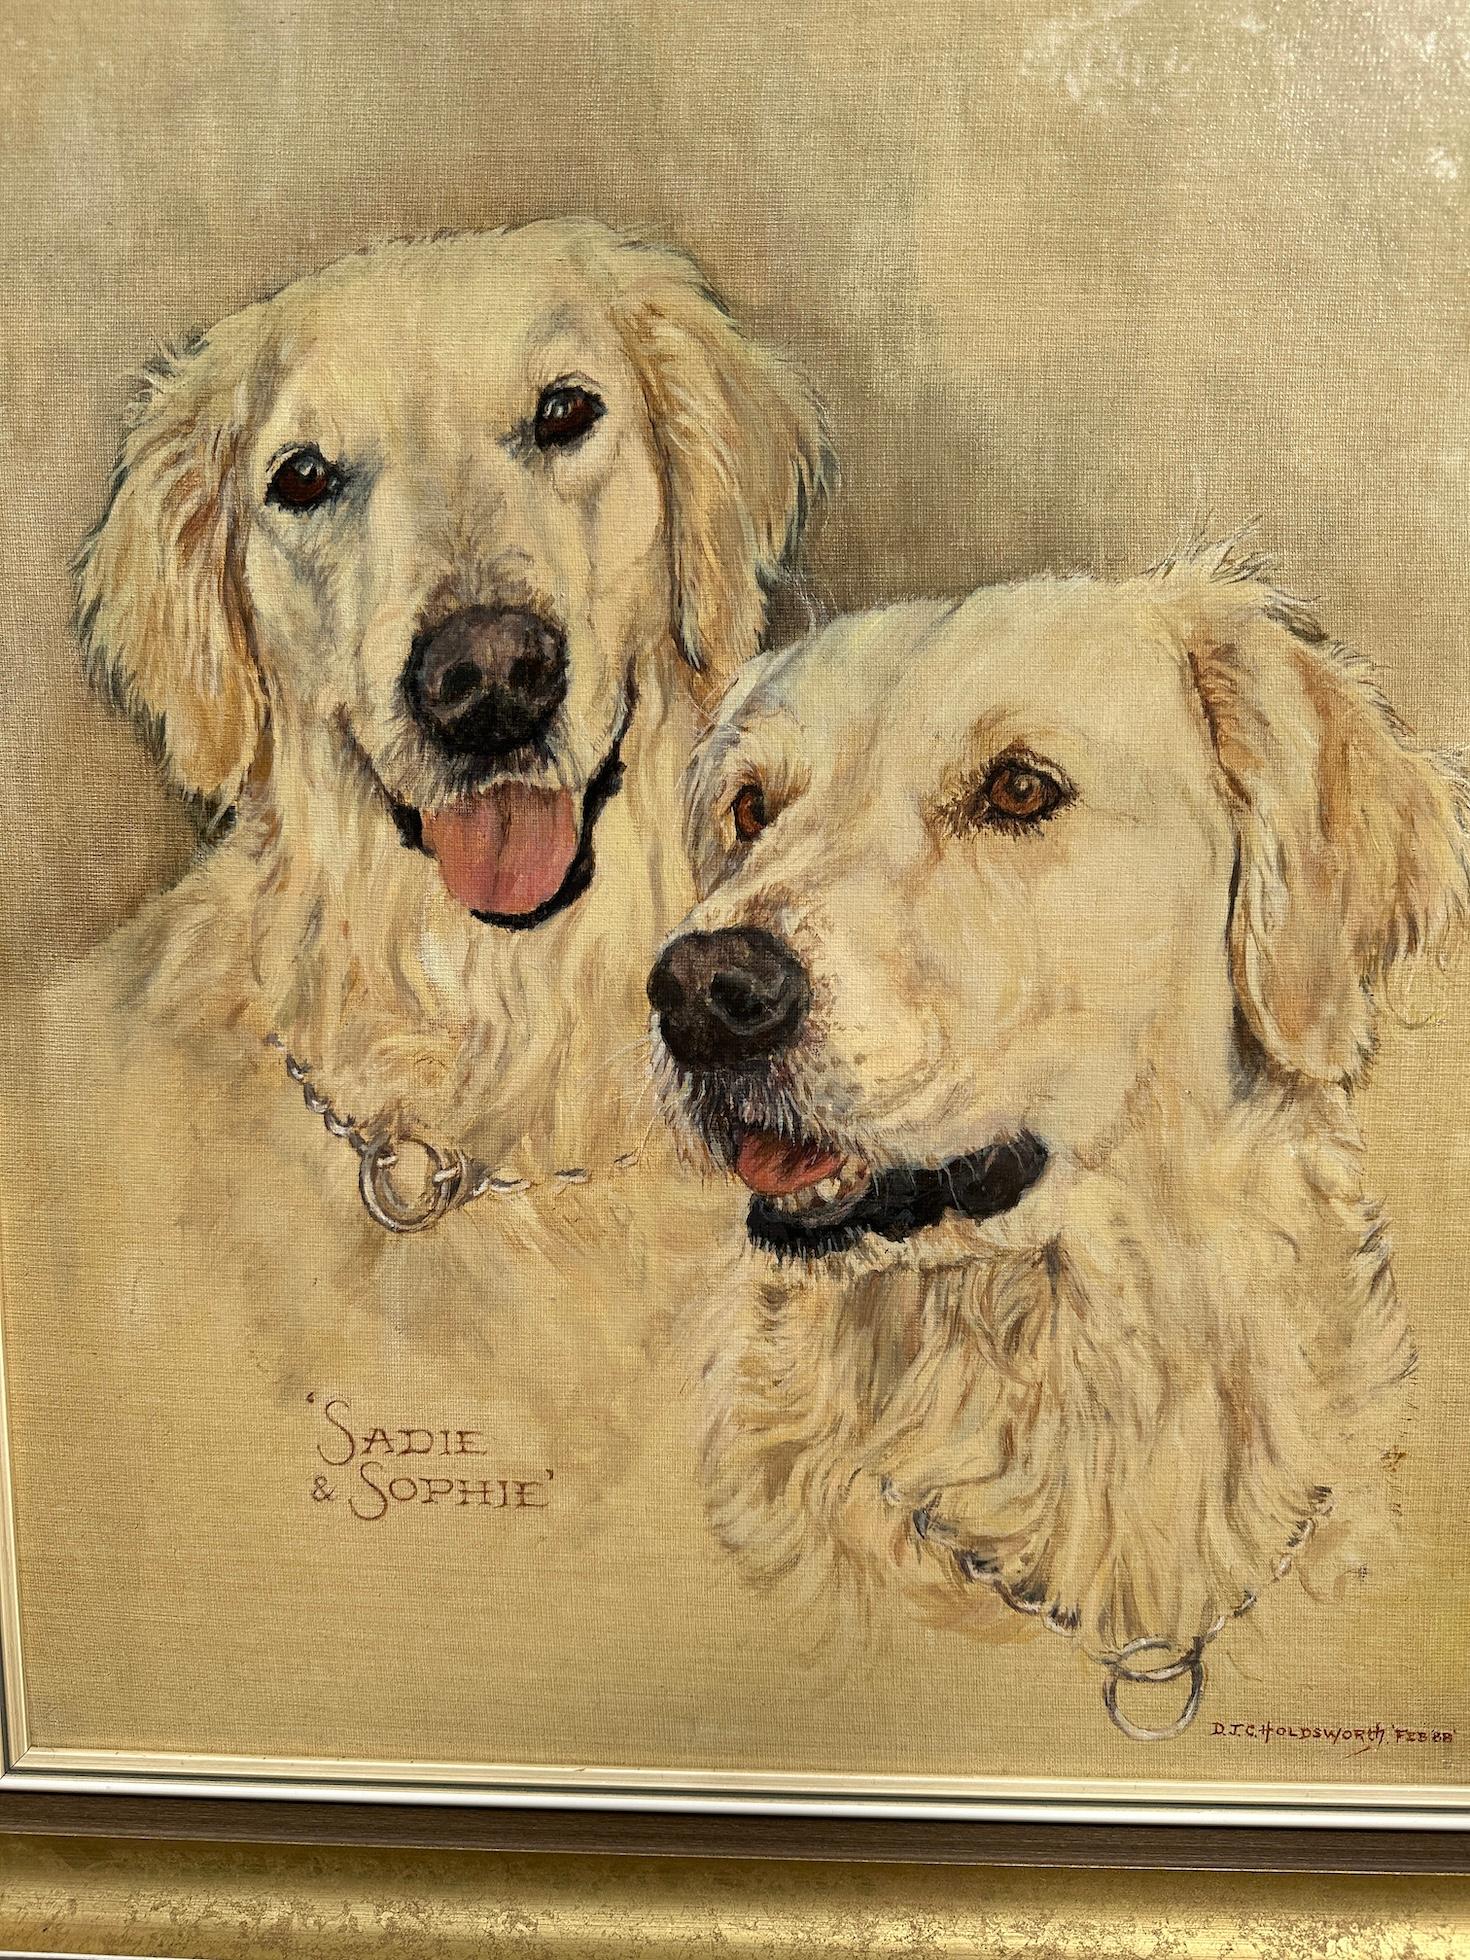 20th century English portrait of two Labrador Retriever dogs Sadie & Sophie - Modern Painting by D.J.Holdsworth